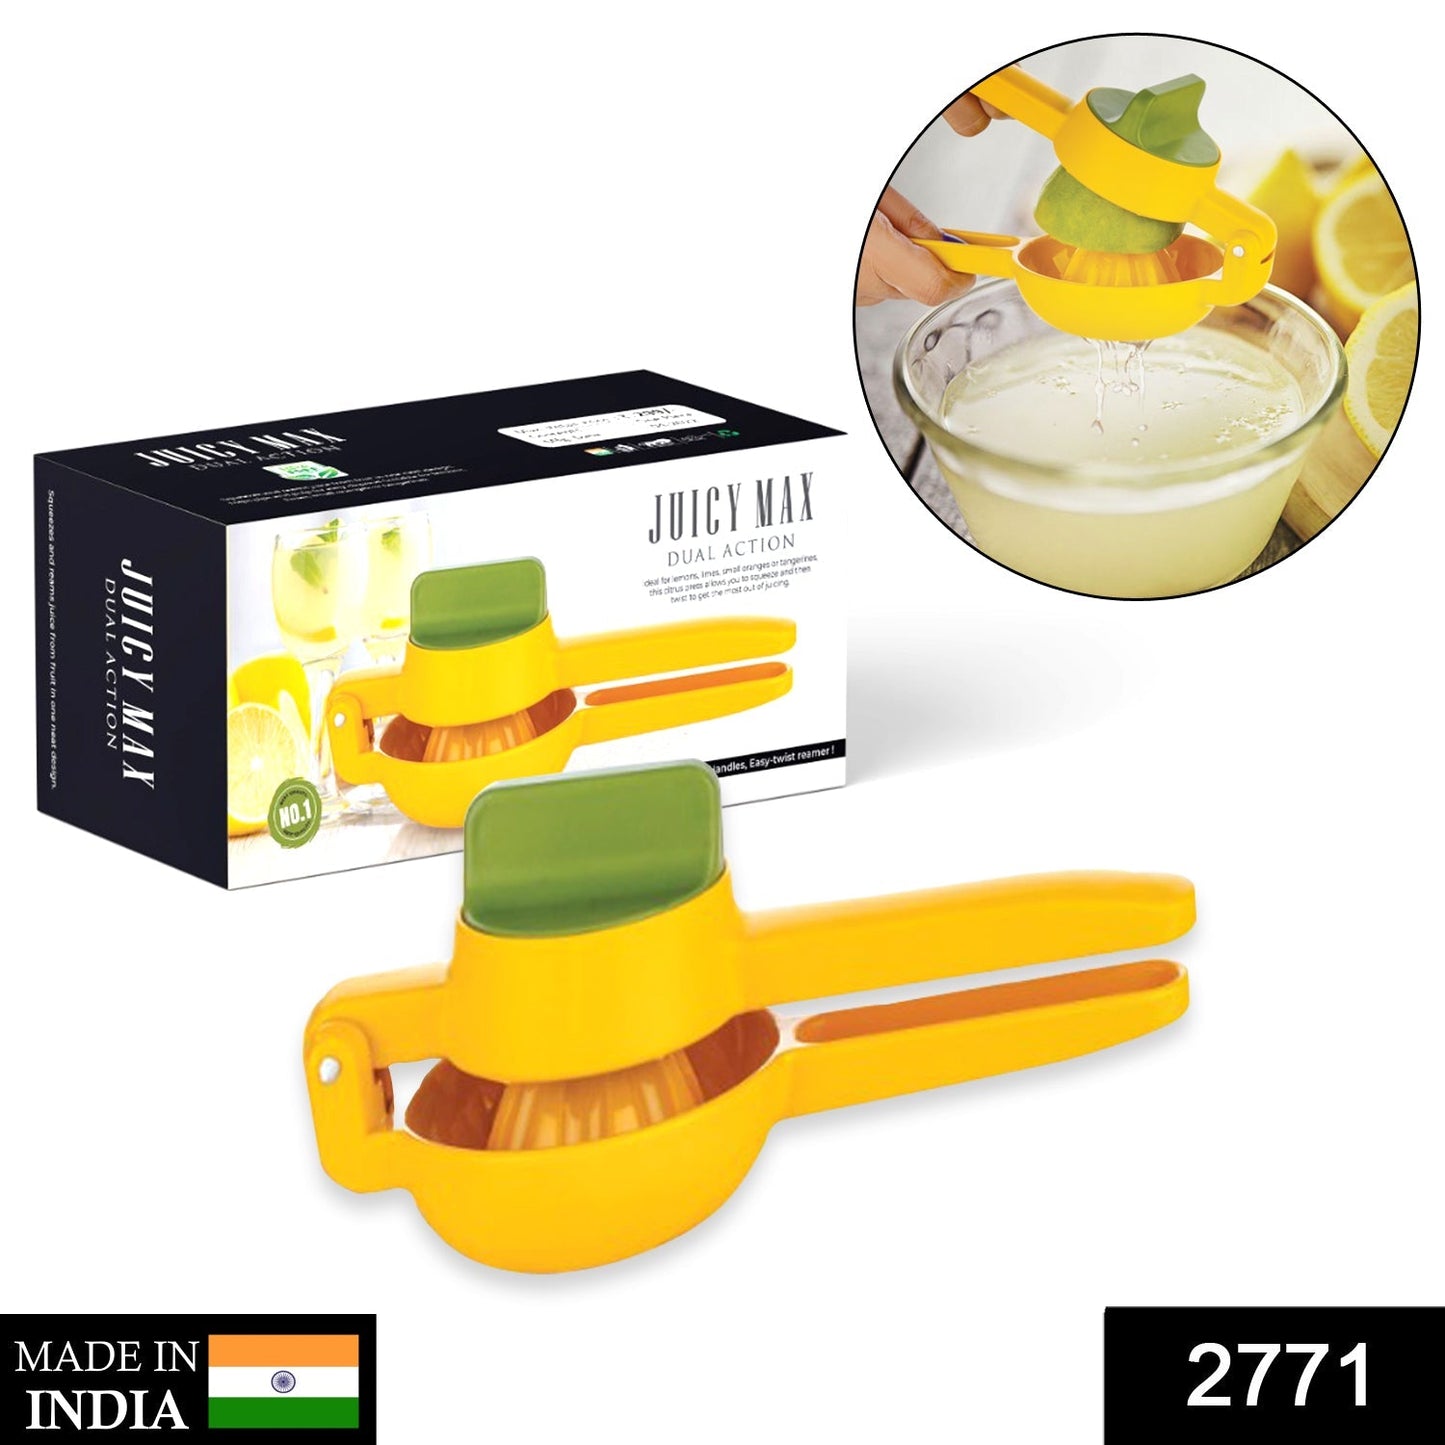 2771 Lemon Squeezer Used For Squeezing Lemons For Types Of Food Stuffs.